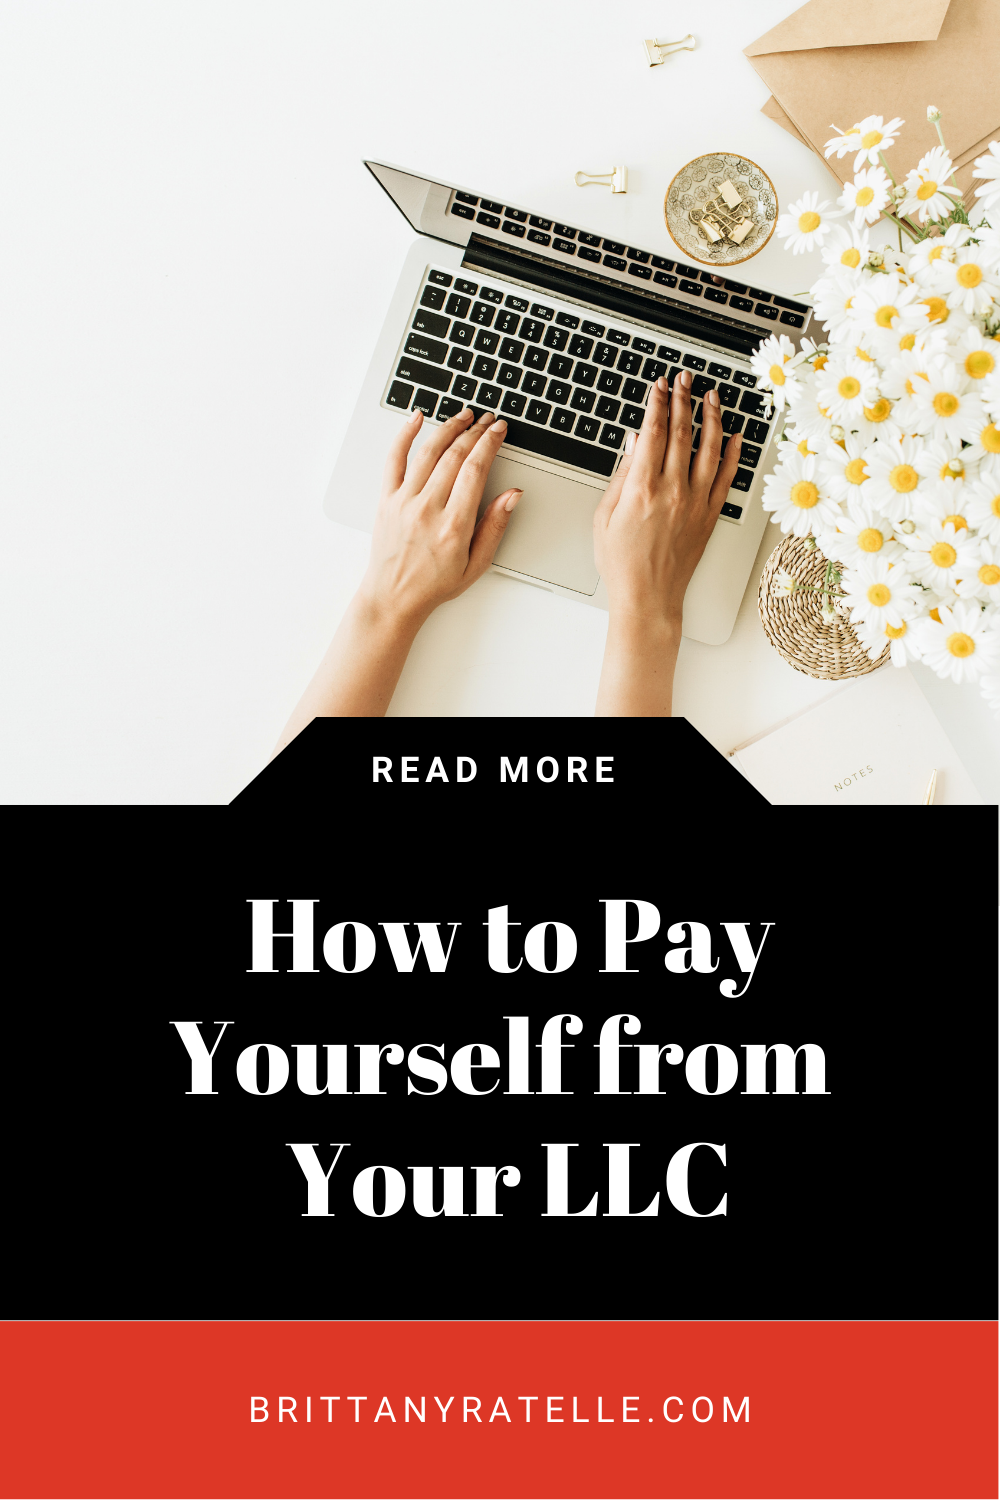 how to pay yourself from your llc. www.brittanyratelle.com